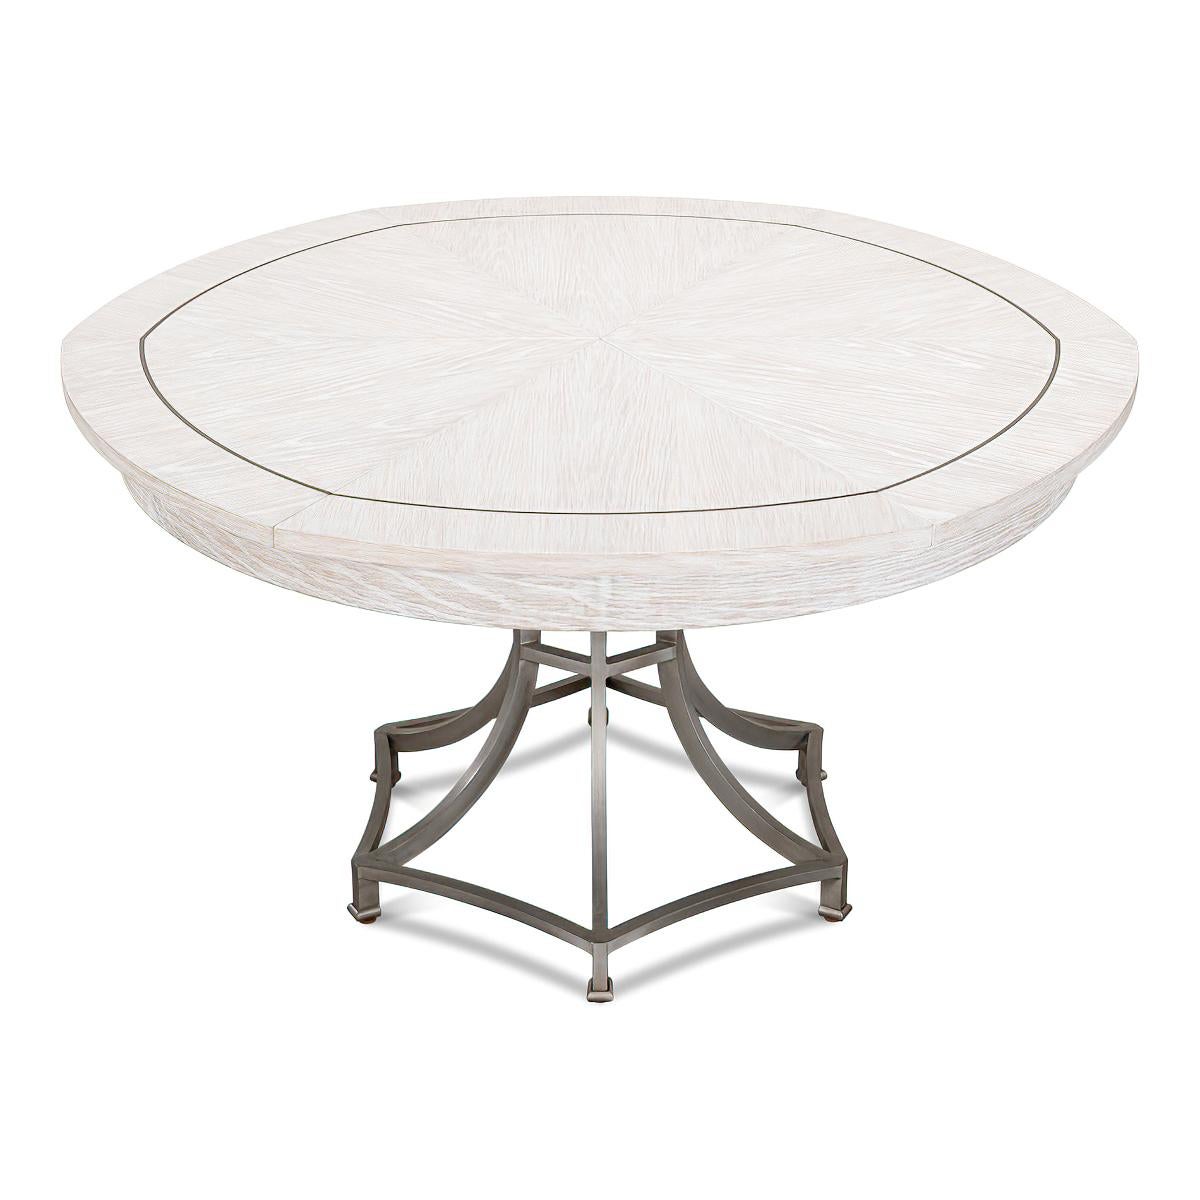 Modern Industrial Round Dining Table, White Wash 1